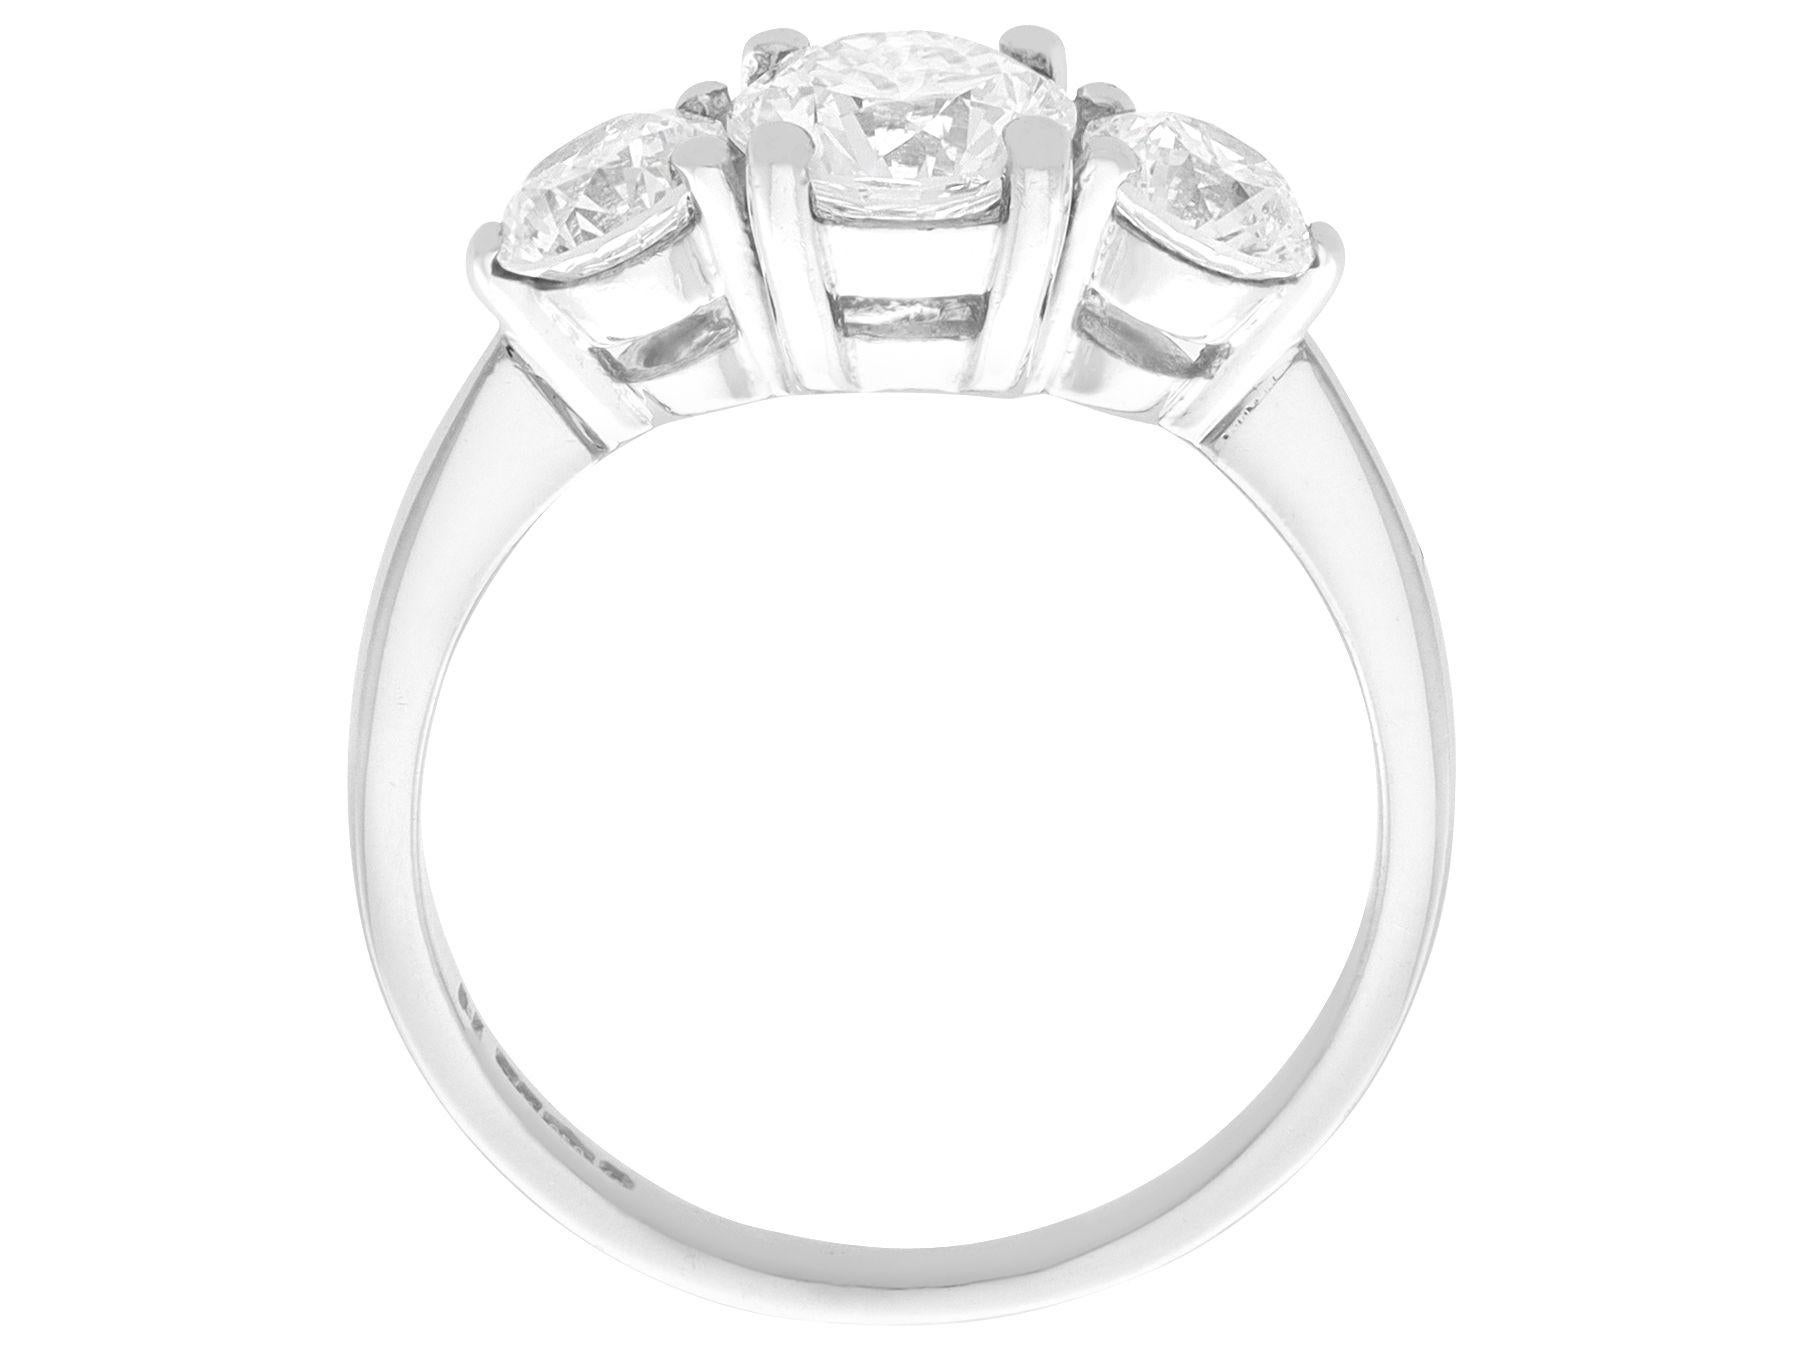 Women's or Men's Vintage and Contemporary 1.81 Carat Diamond and Platinum Trilogy Ring For Sale